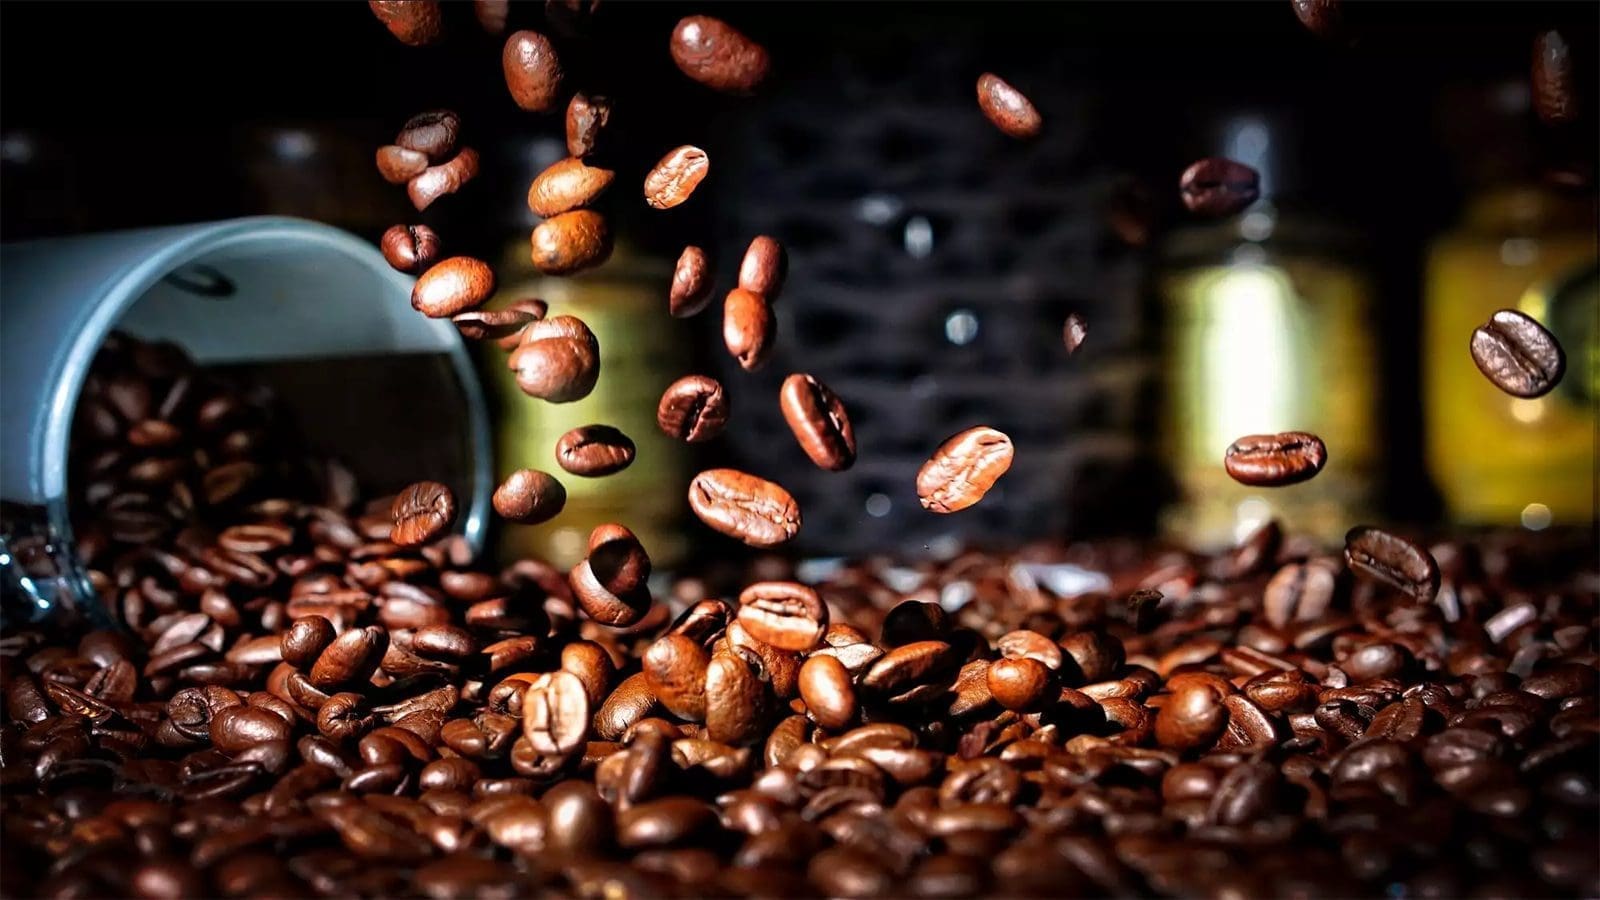 Japan intensifies inspections on Kenyan coffee amidst pesticide contamination concerns